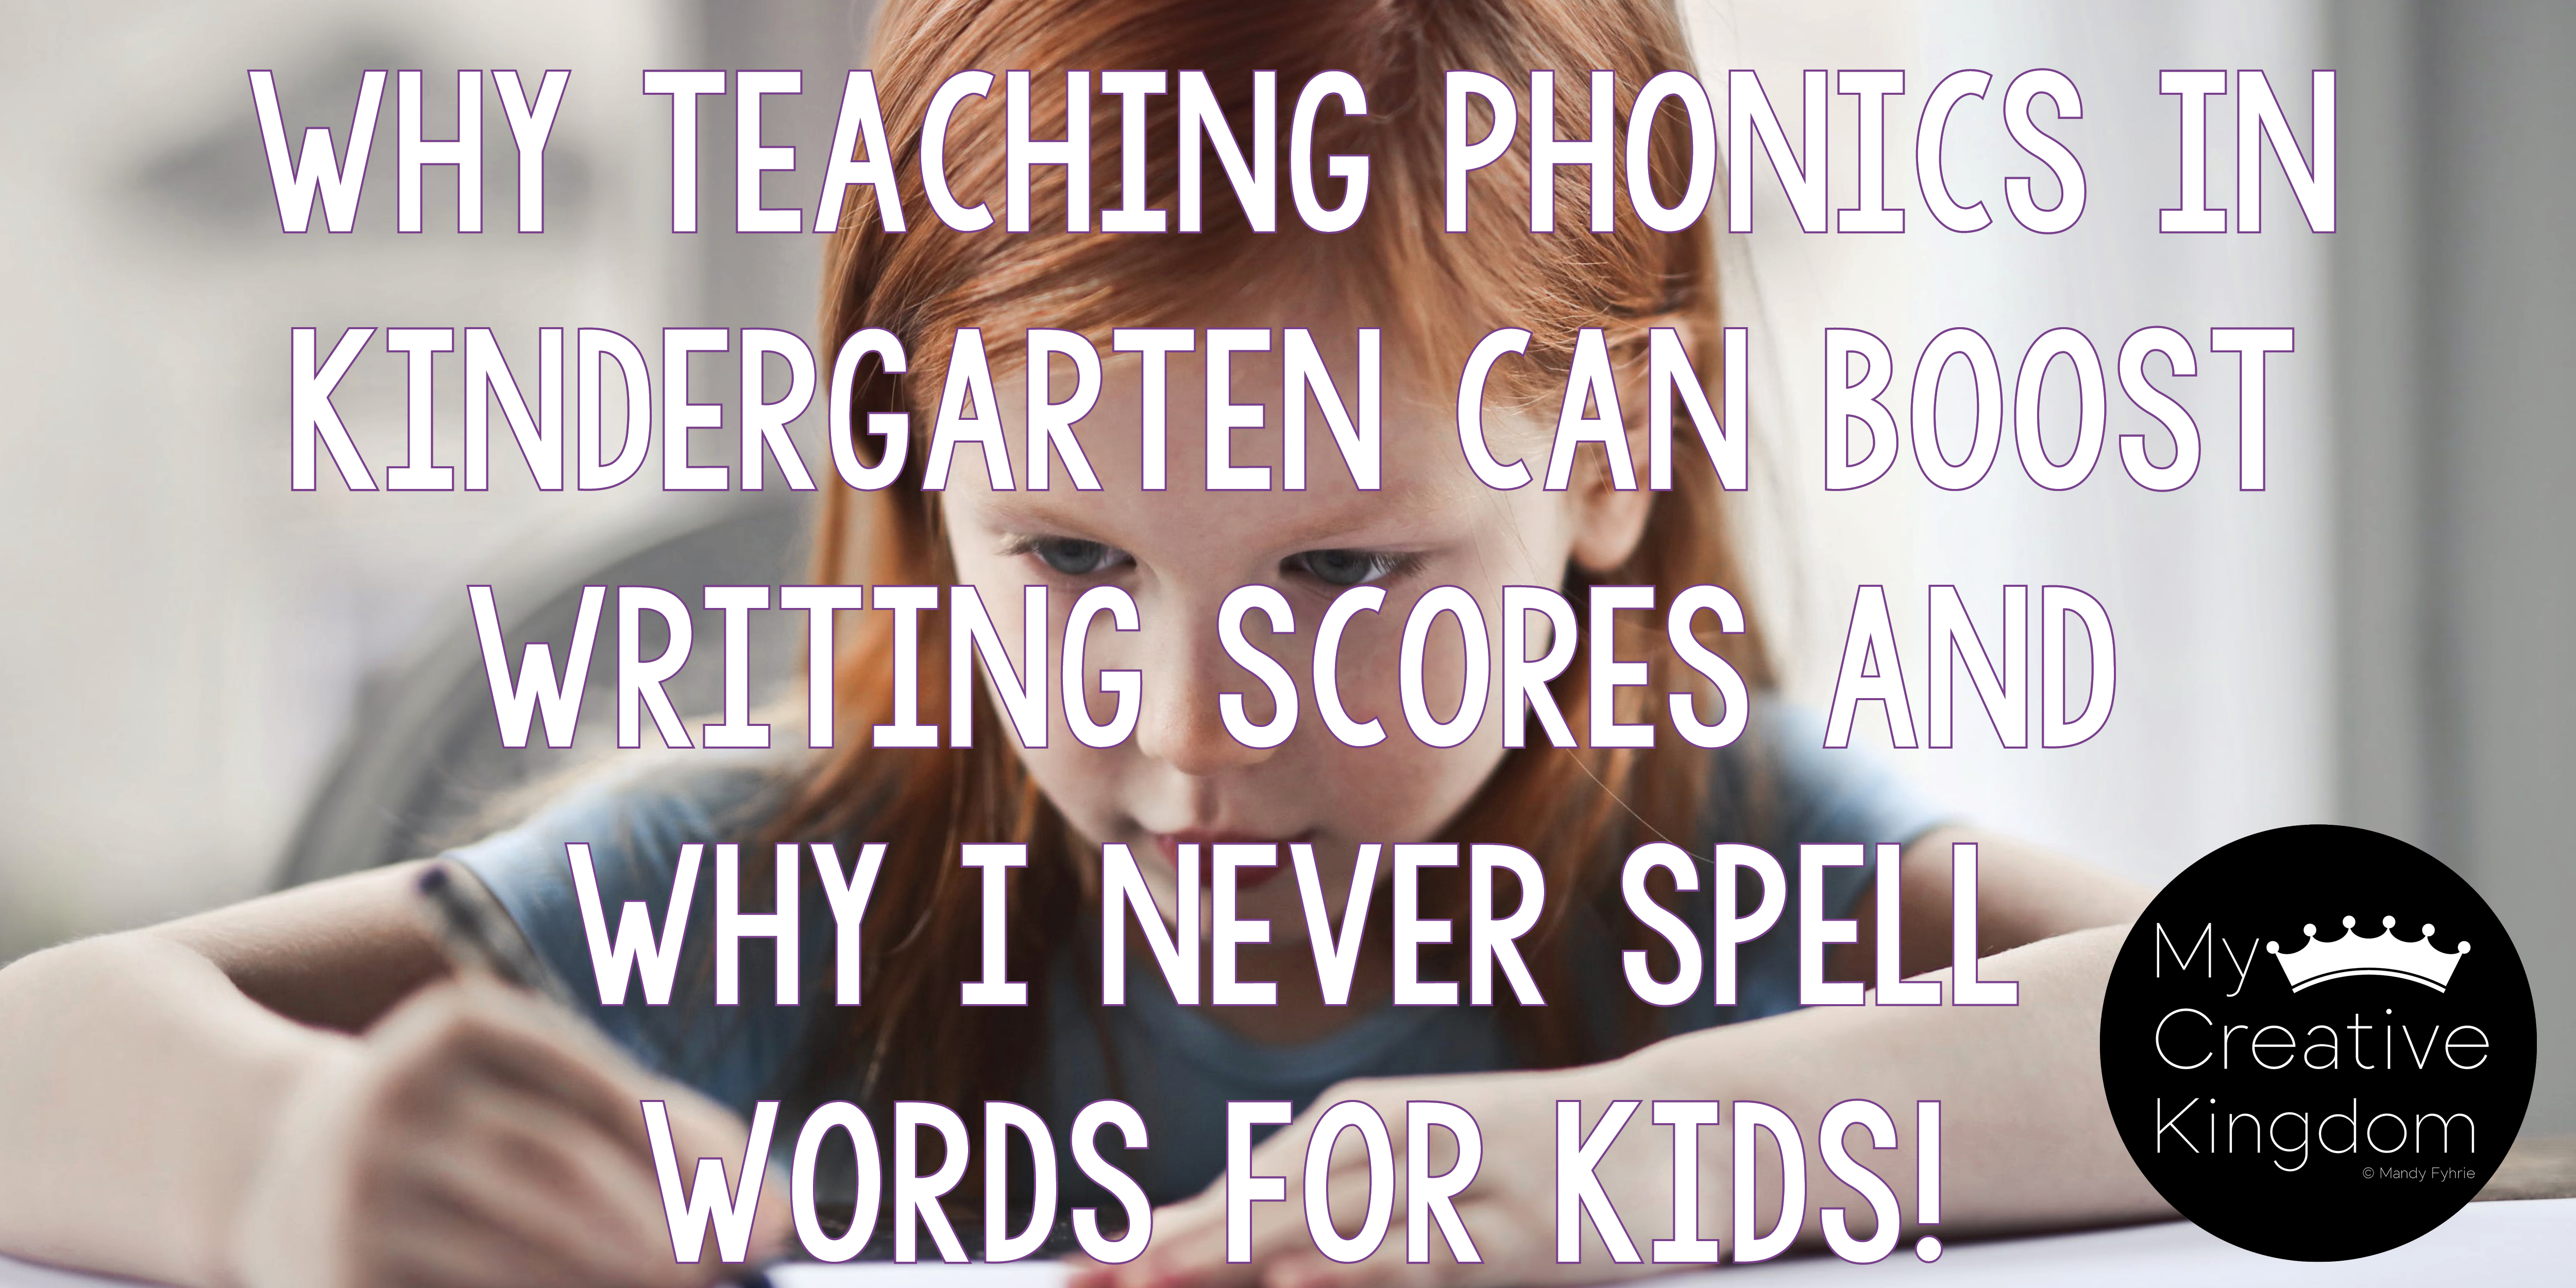 Why teaching Phonics in Kindergarten can boost writing scores and why I never spell words for kids!